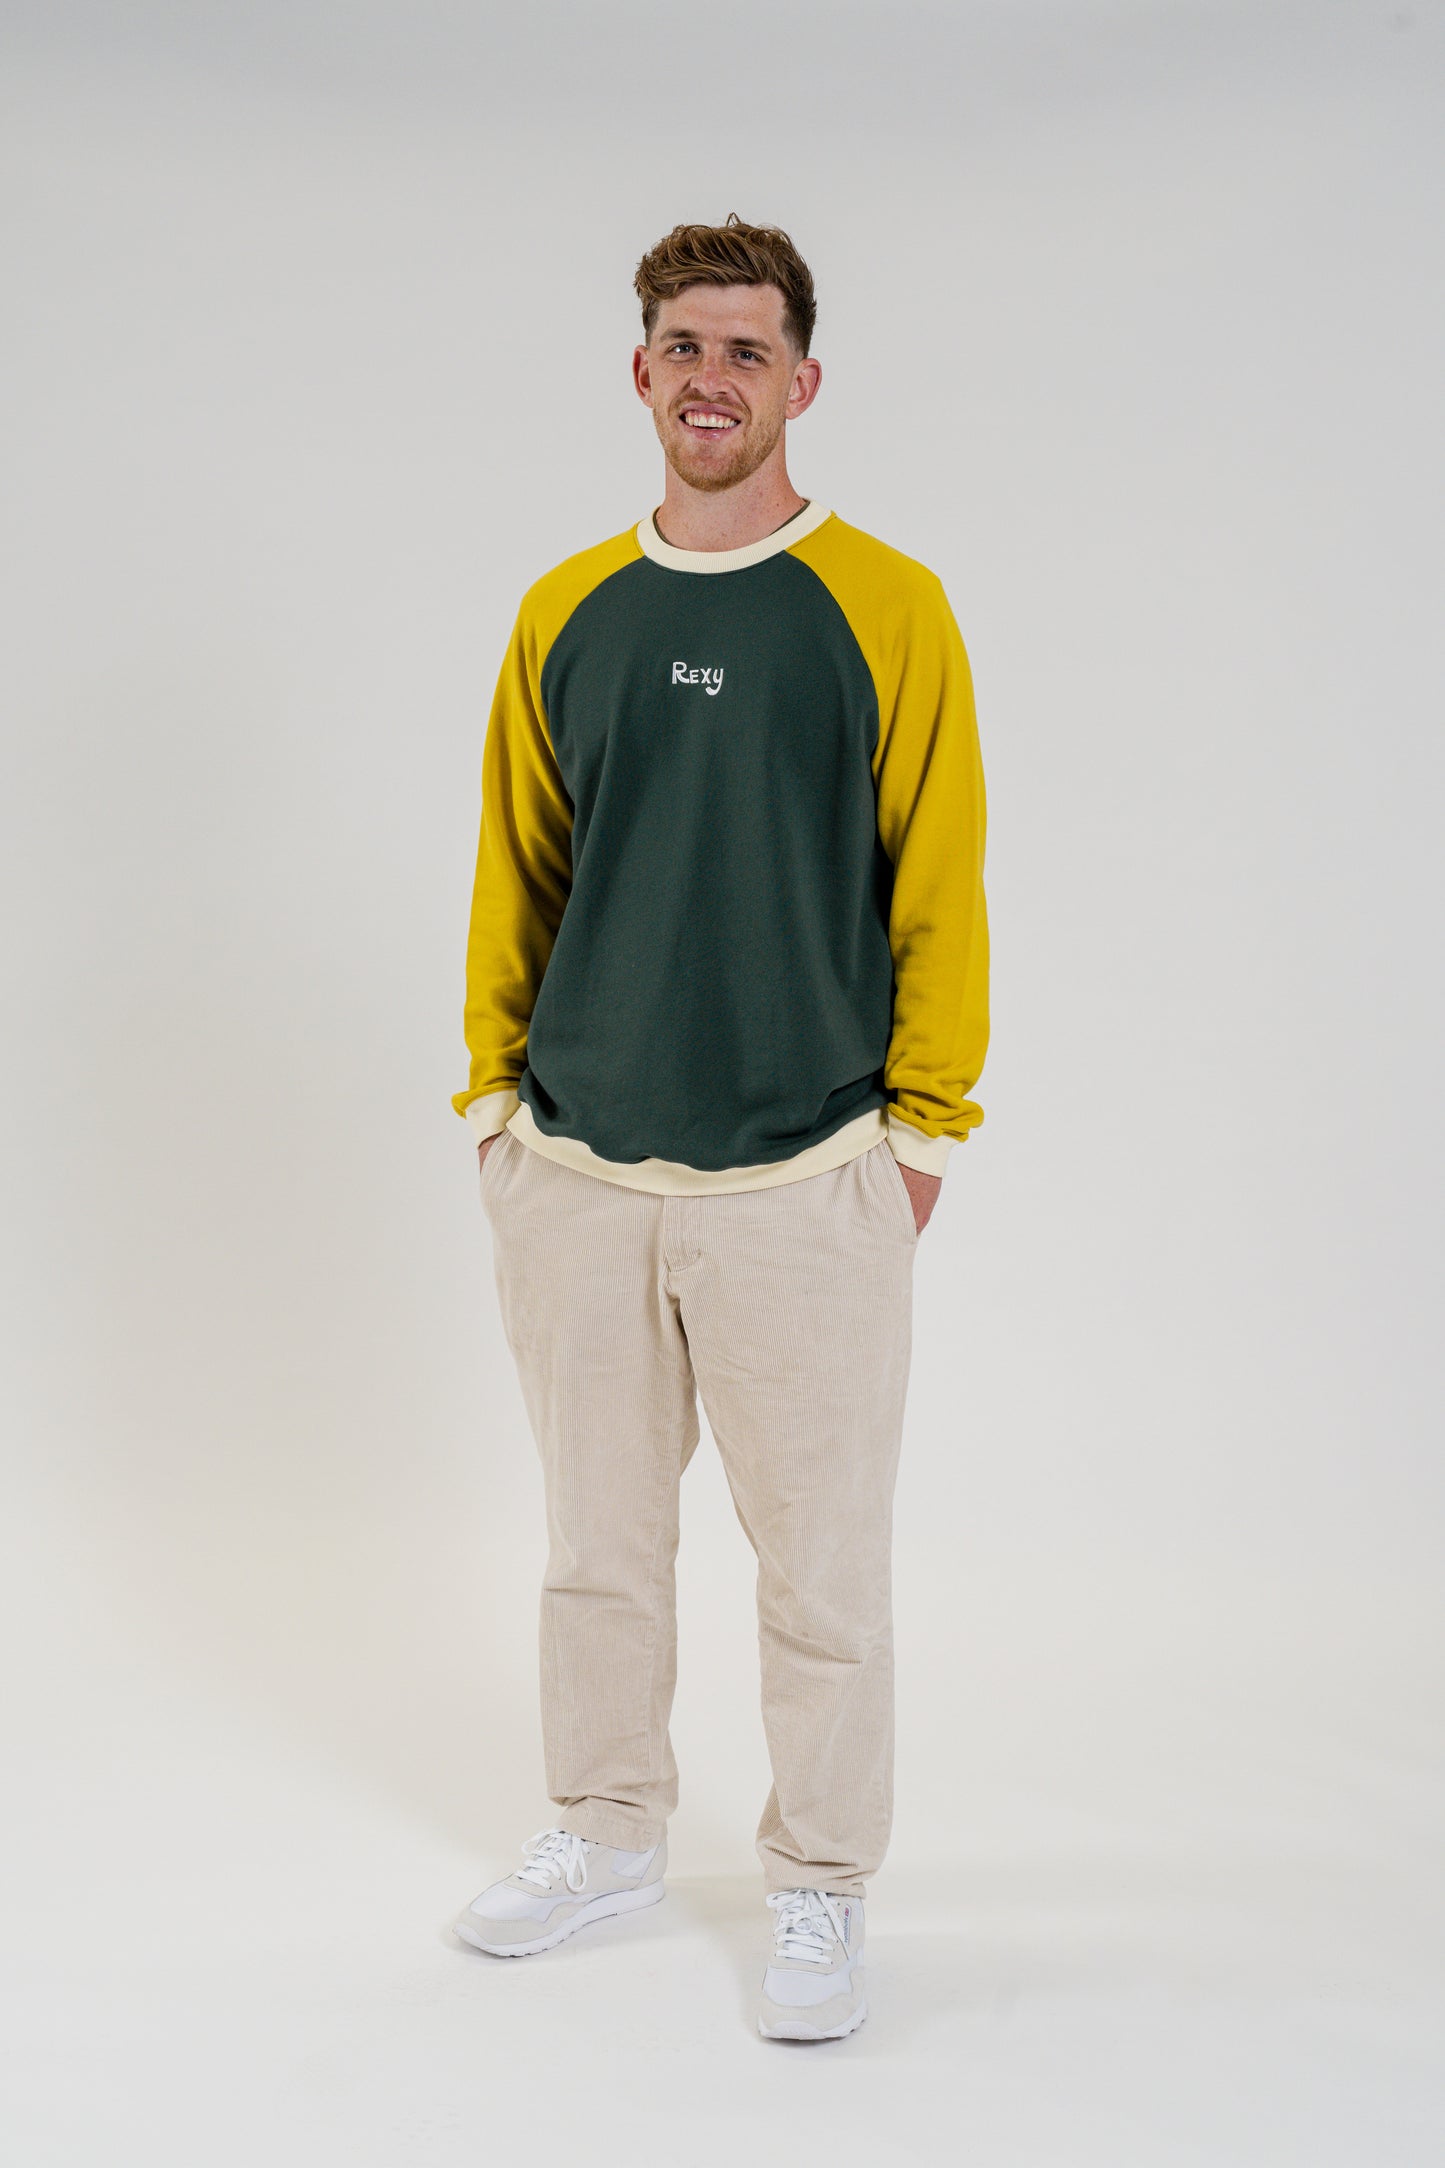 Rexy Sweater - Forest Green & Mustard (Adult)